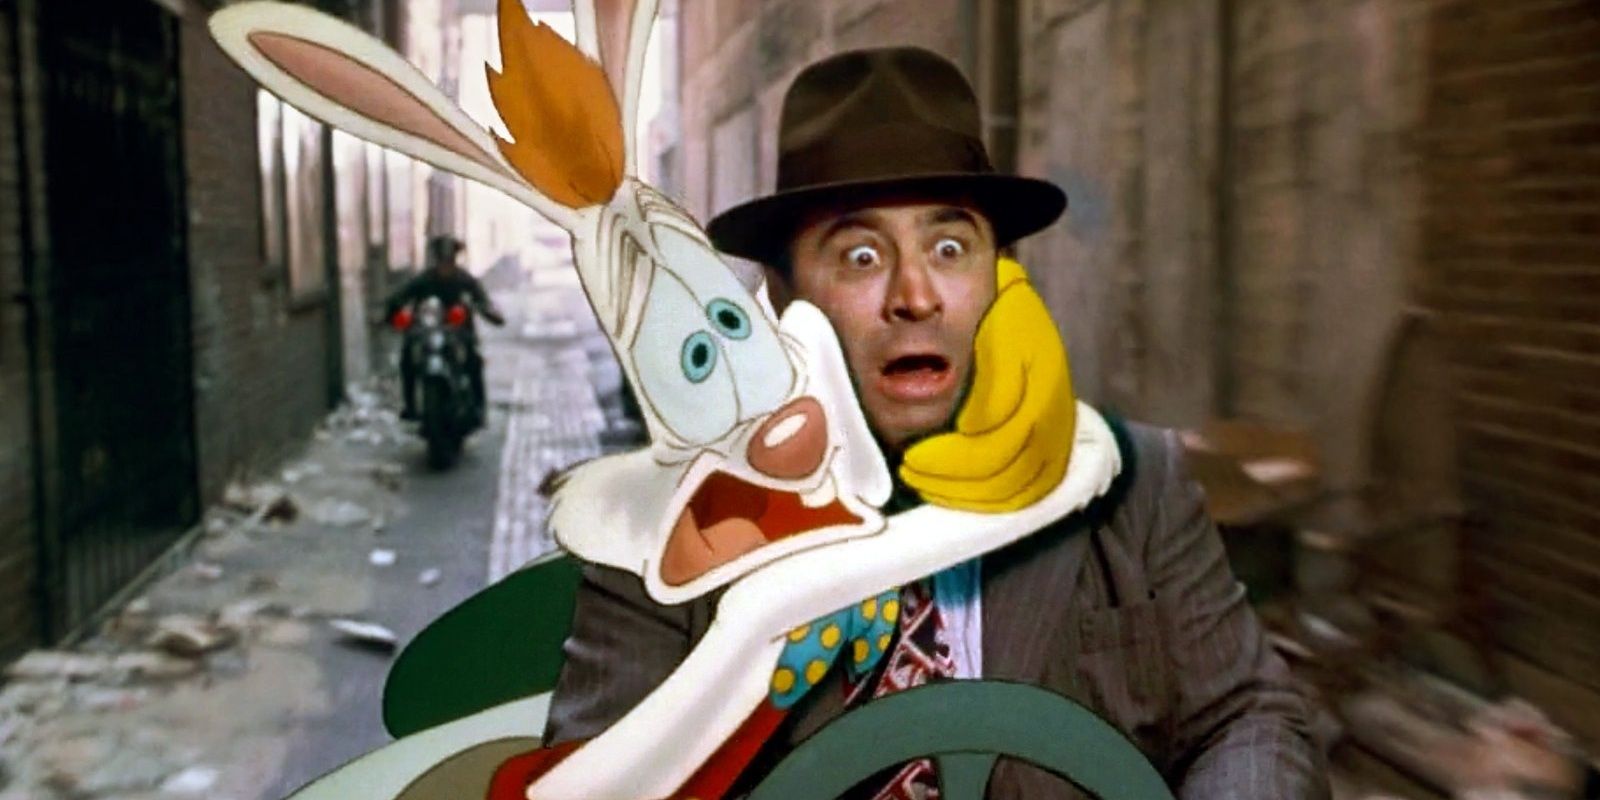 Roger holding onto Eddie as they're about to crash their car in Who Framed Roger Rabbit